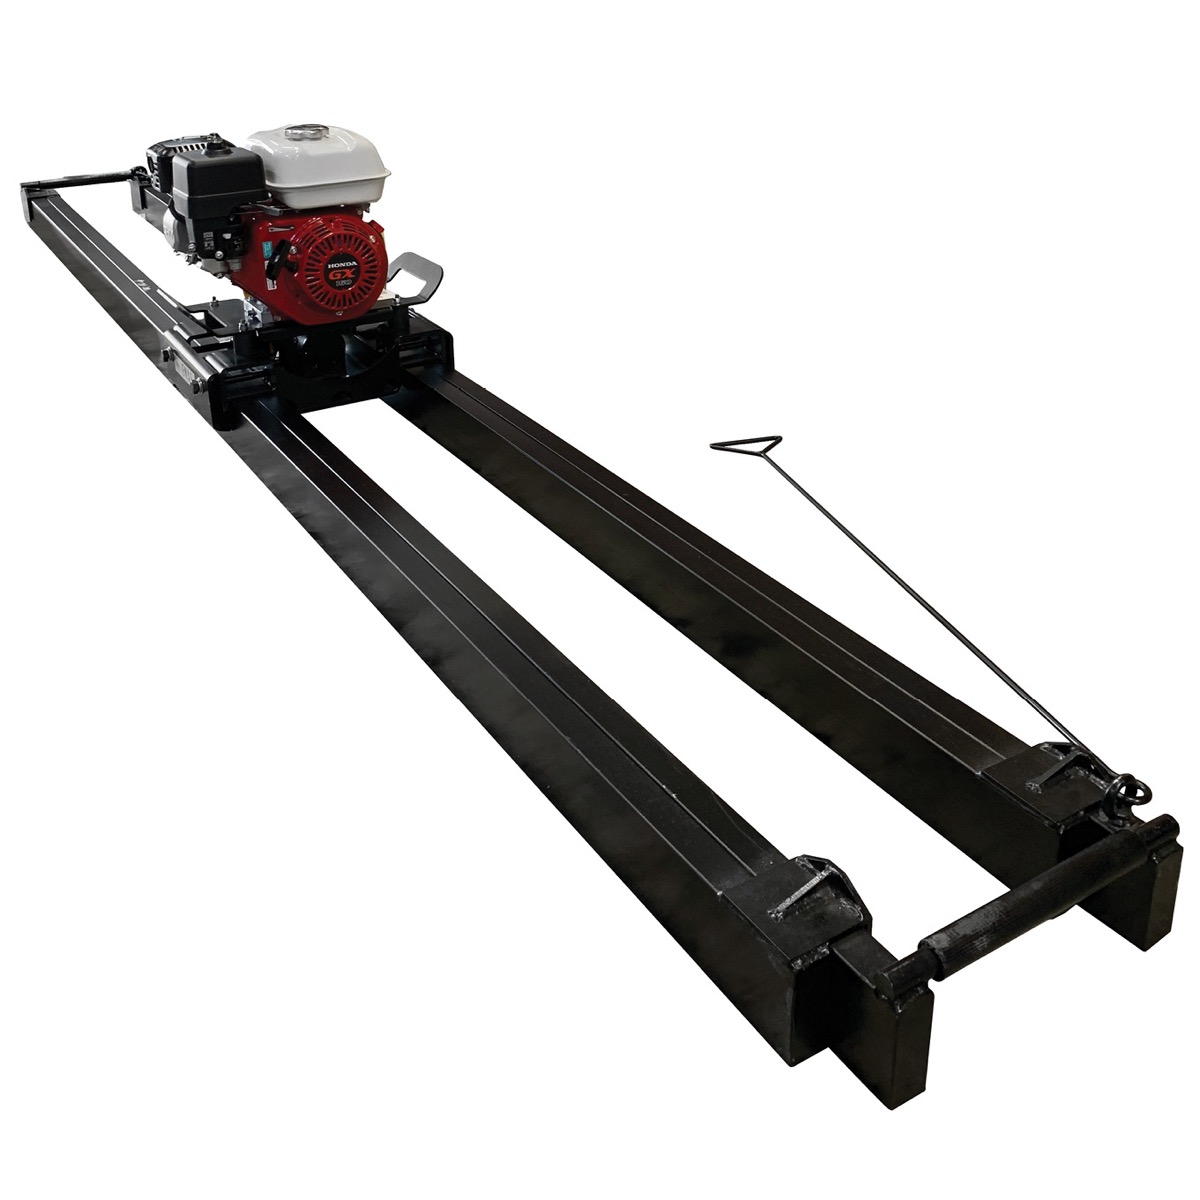 The Double Beam screeds from ENAR are available with both Electric and petrol motors. Additionally, ENAR offers both extendable and fixed screeds depending on the job at hand. Available from Speedcrete, United Kingdom.